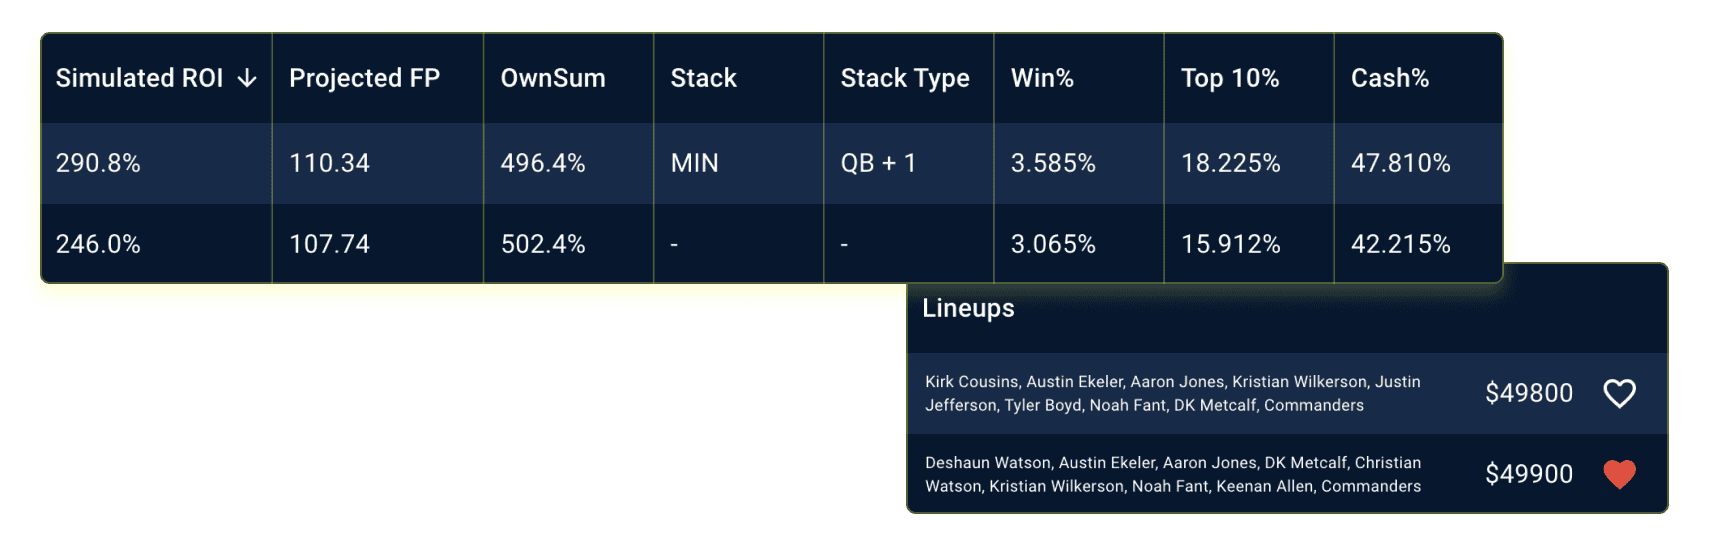 NFL DFS Lineup Pre-Contest Projected ROI